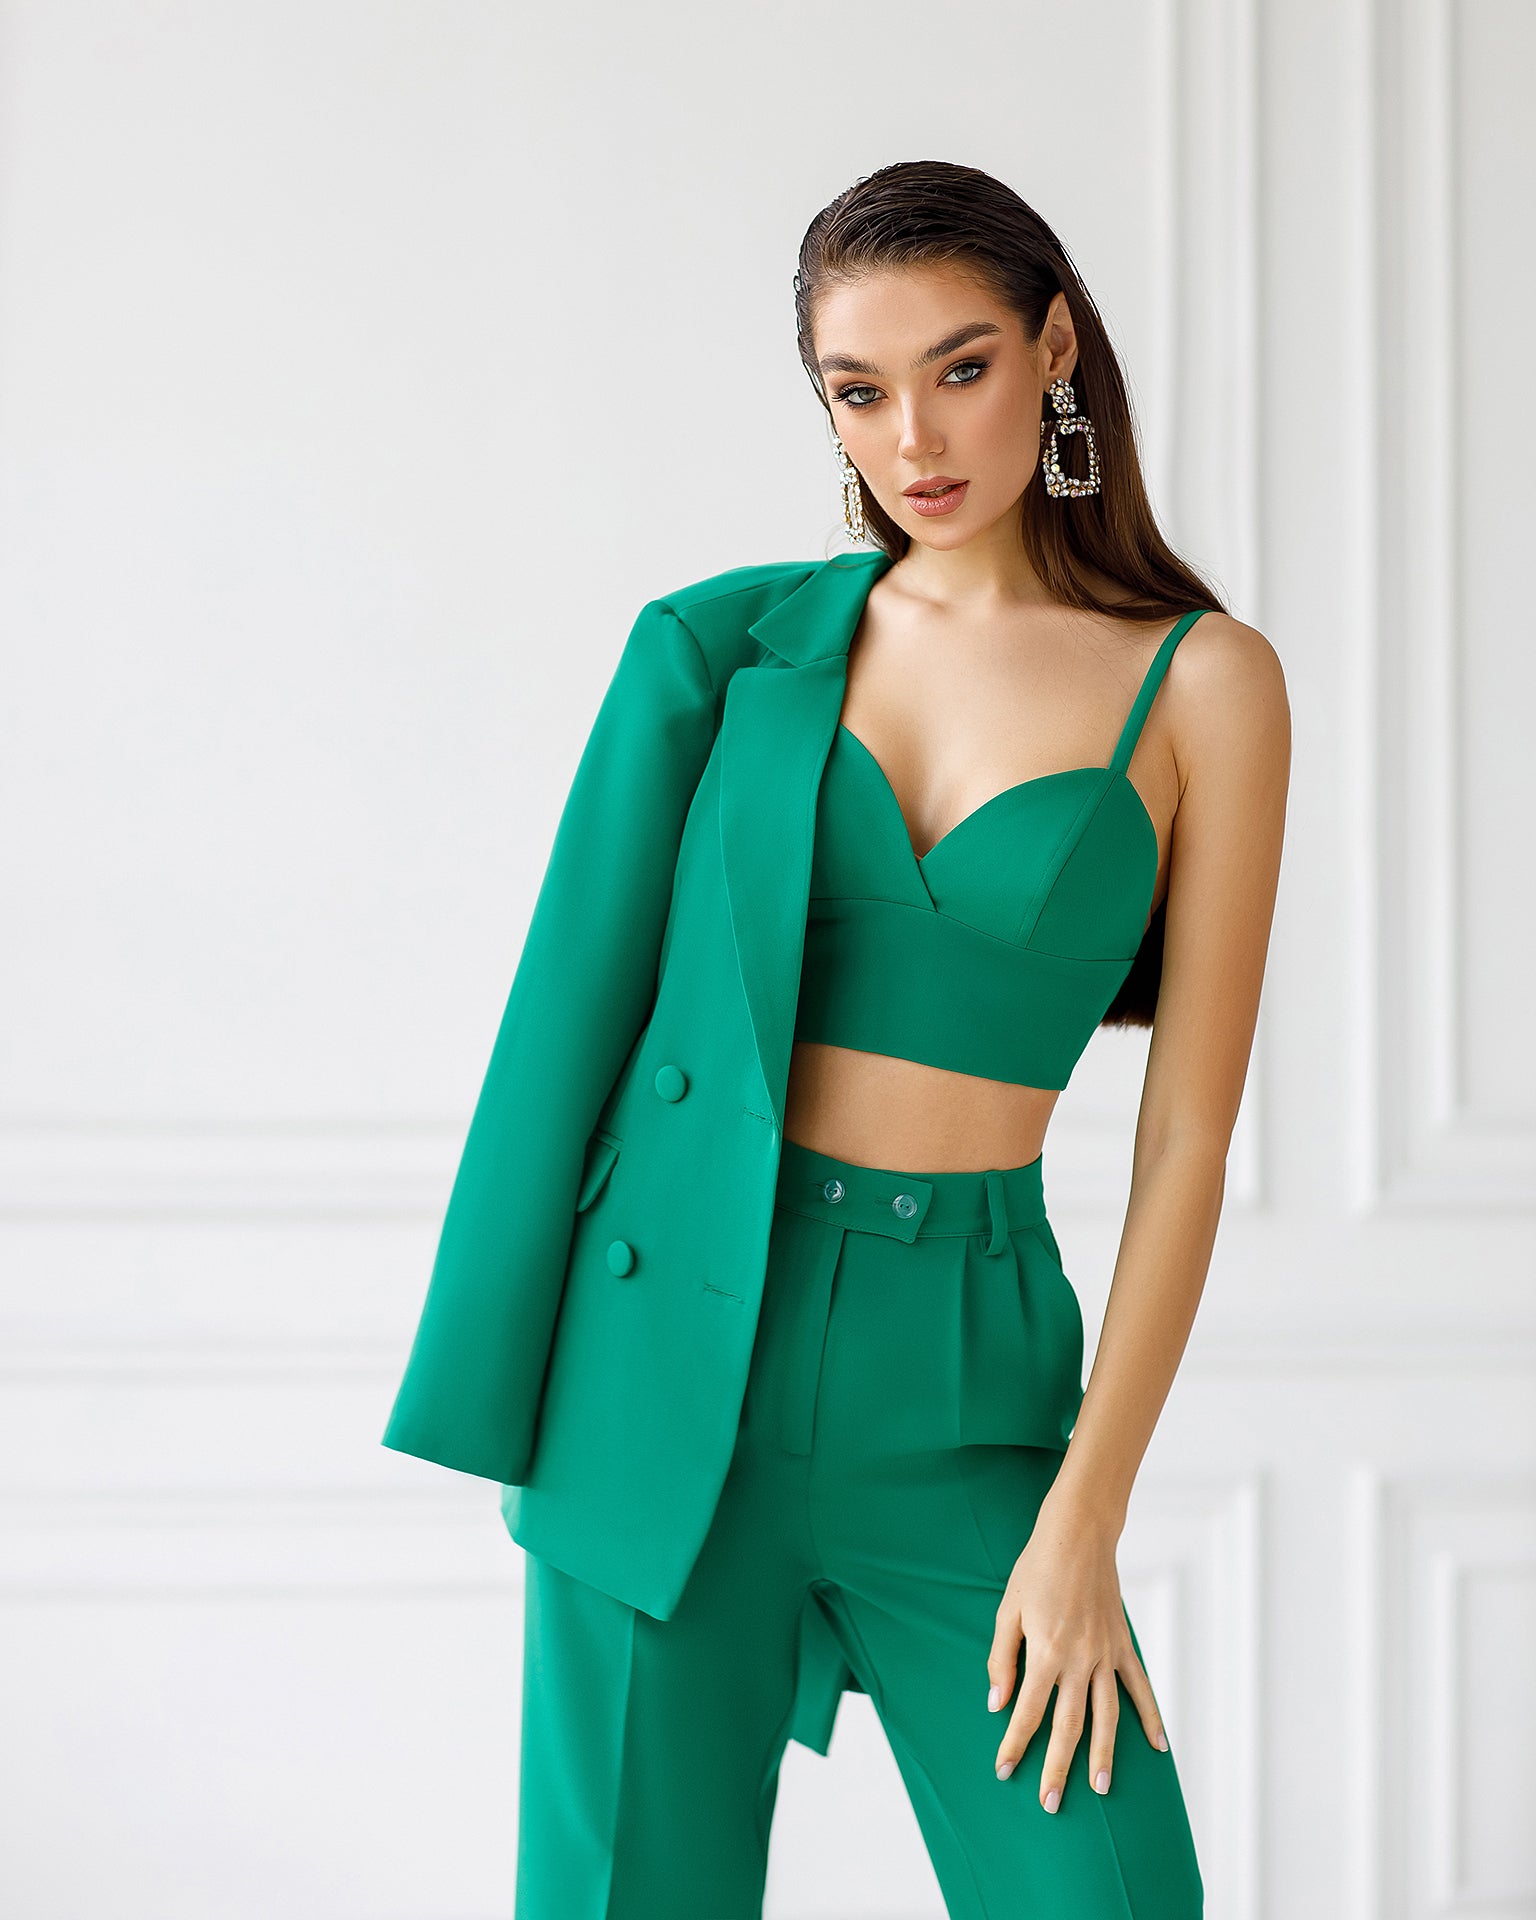 Green Double Breasted Suit 3-Piece